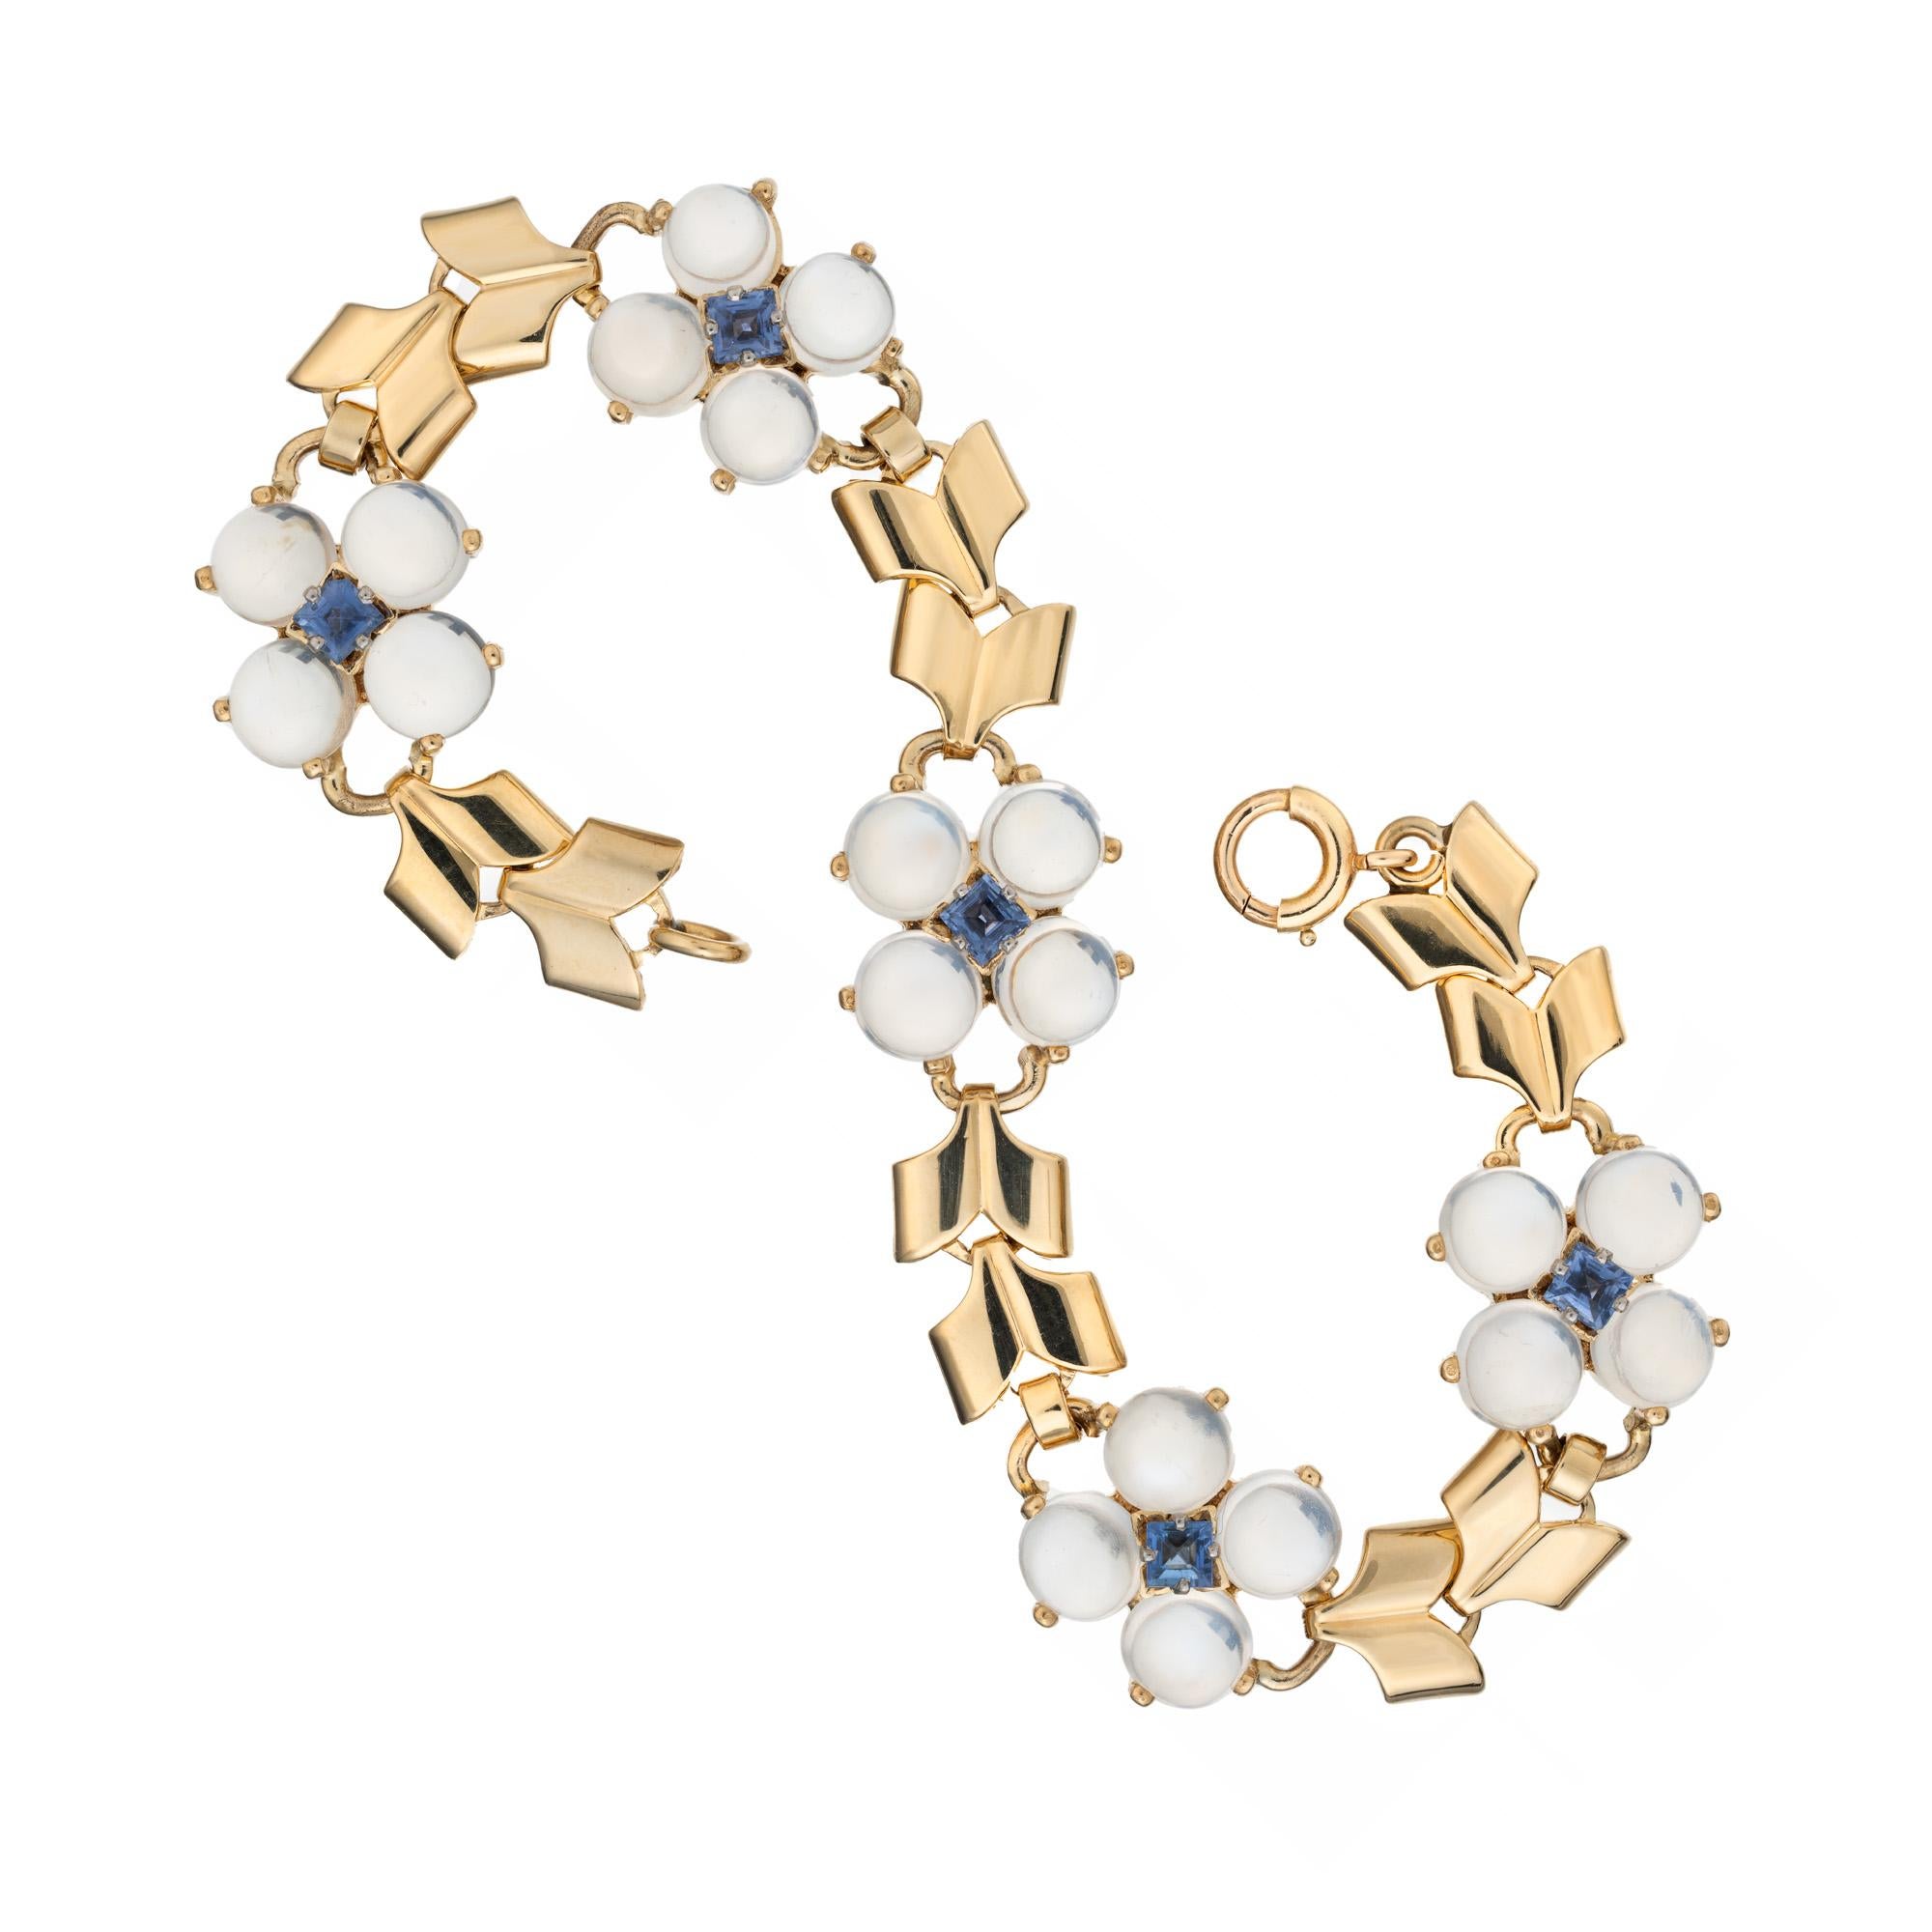 Square Cut Wefferling Berry GIA Certified 1.11 Carat Sapphire Moonstone Gold Bracelet For Sale